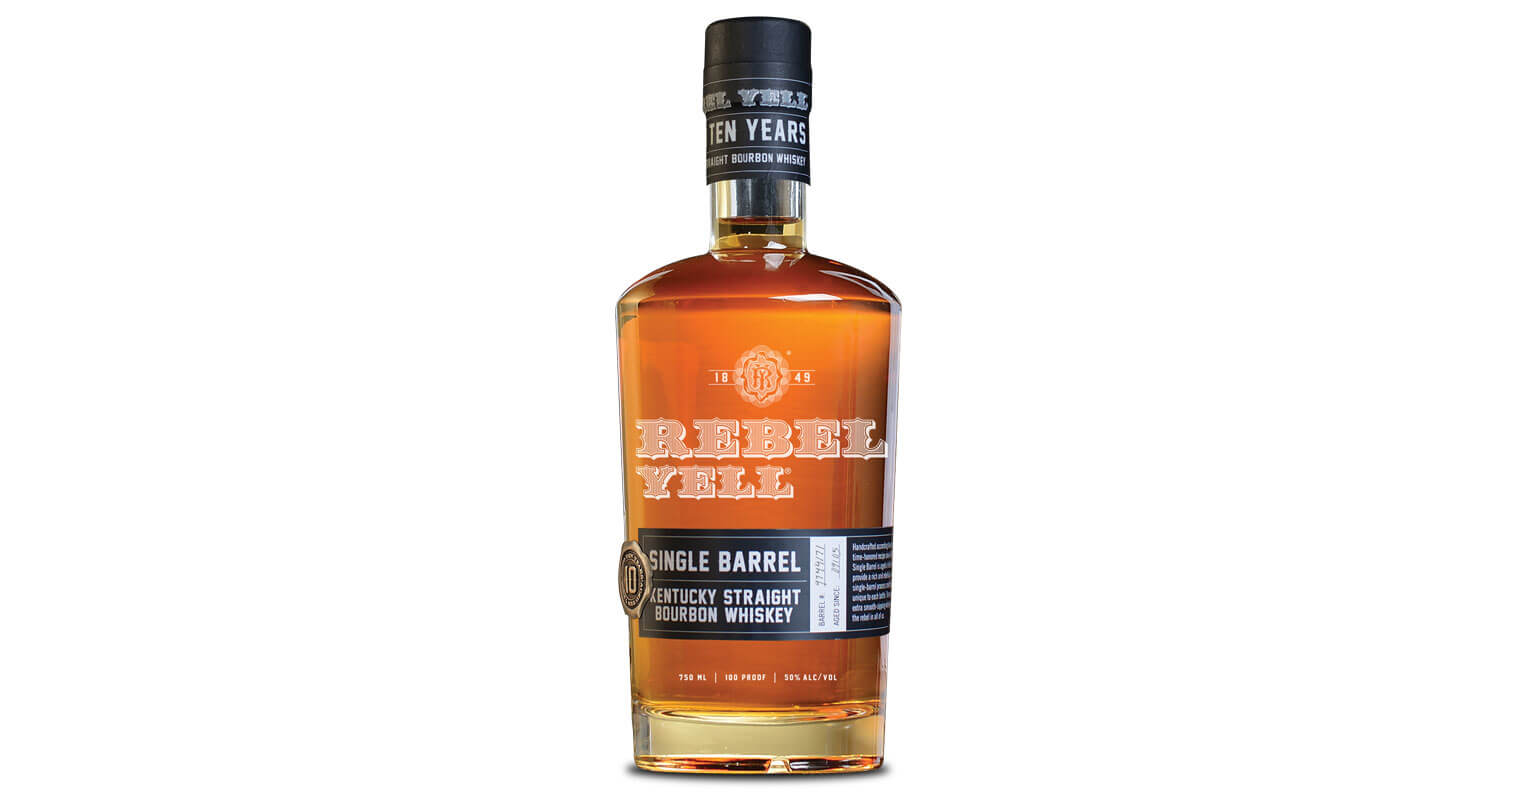 Rebel Yell Bourbon Launches Single Barrel, featured image